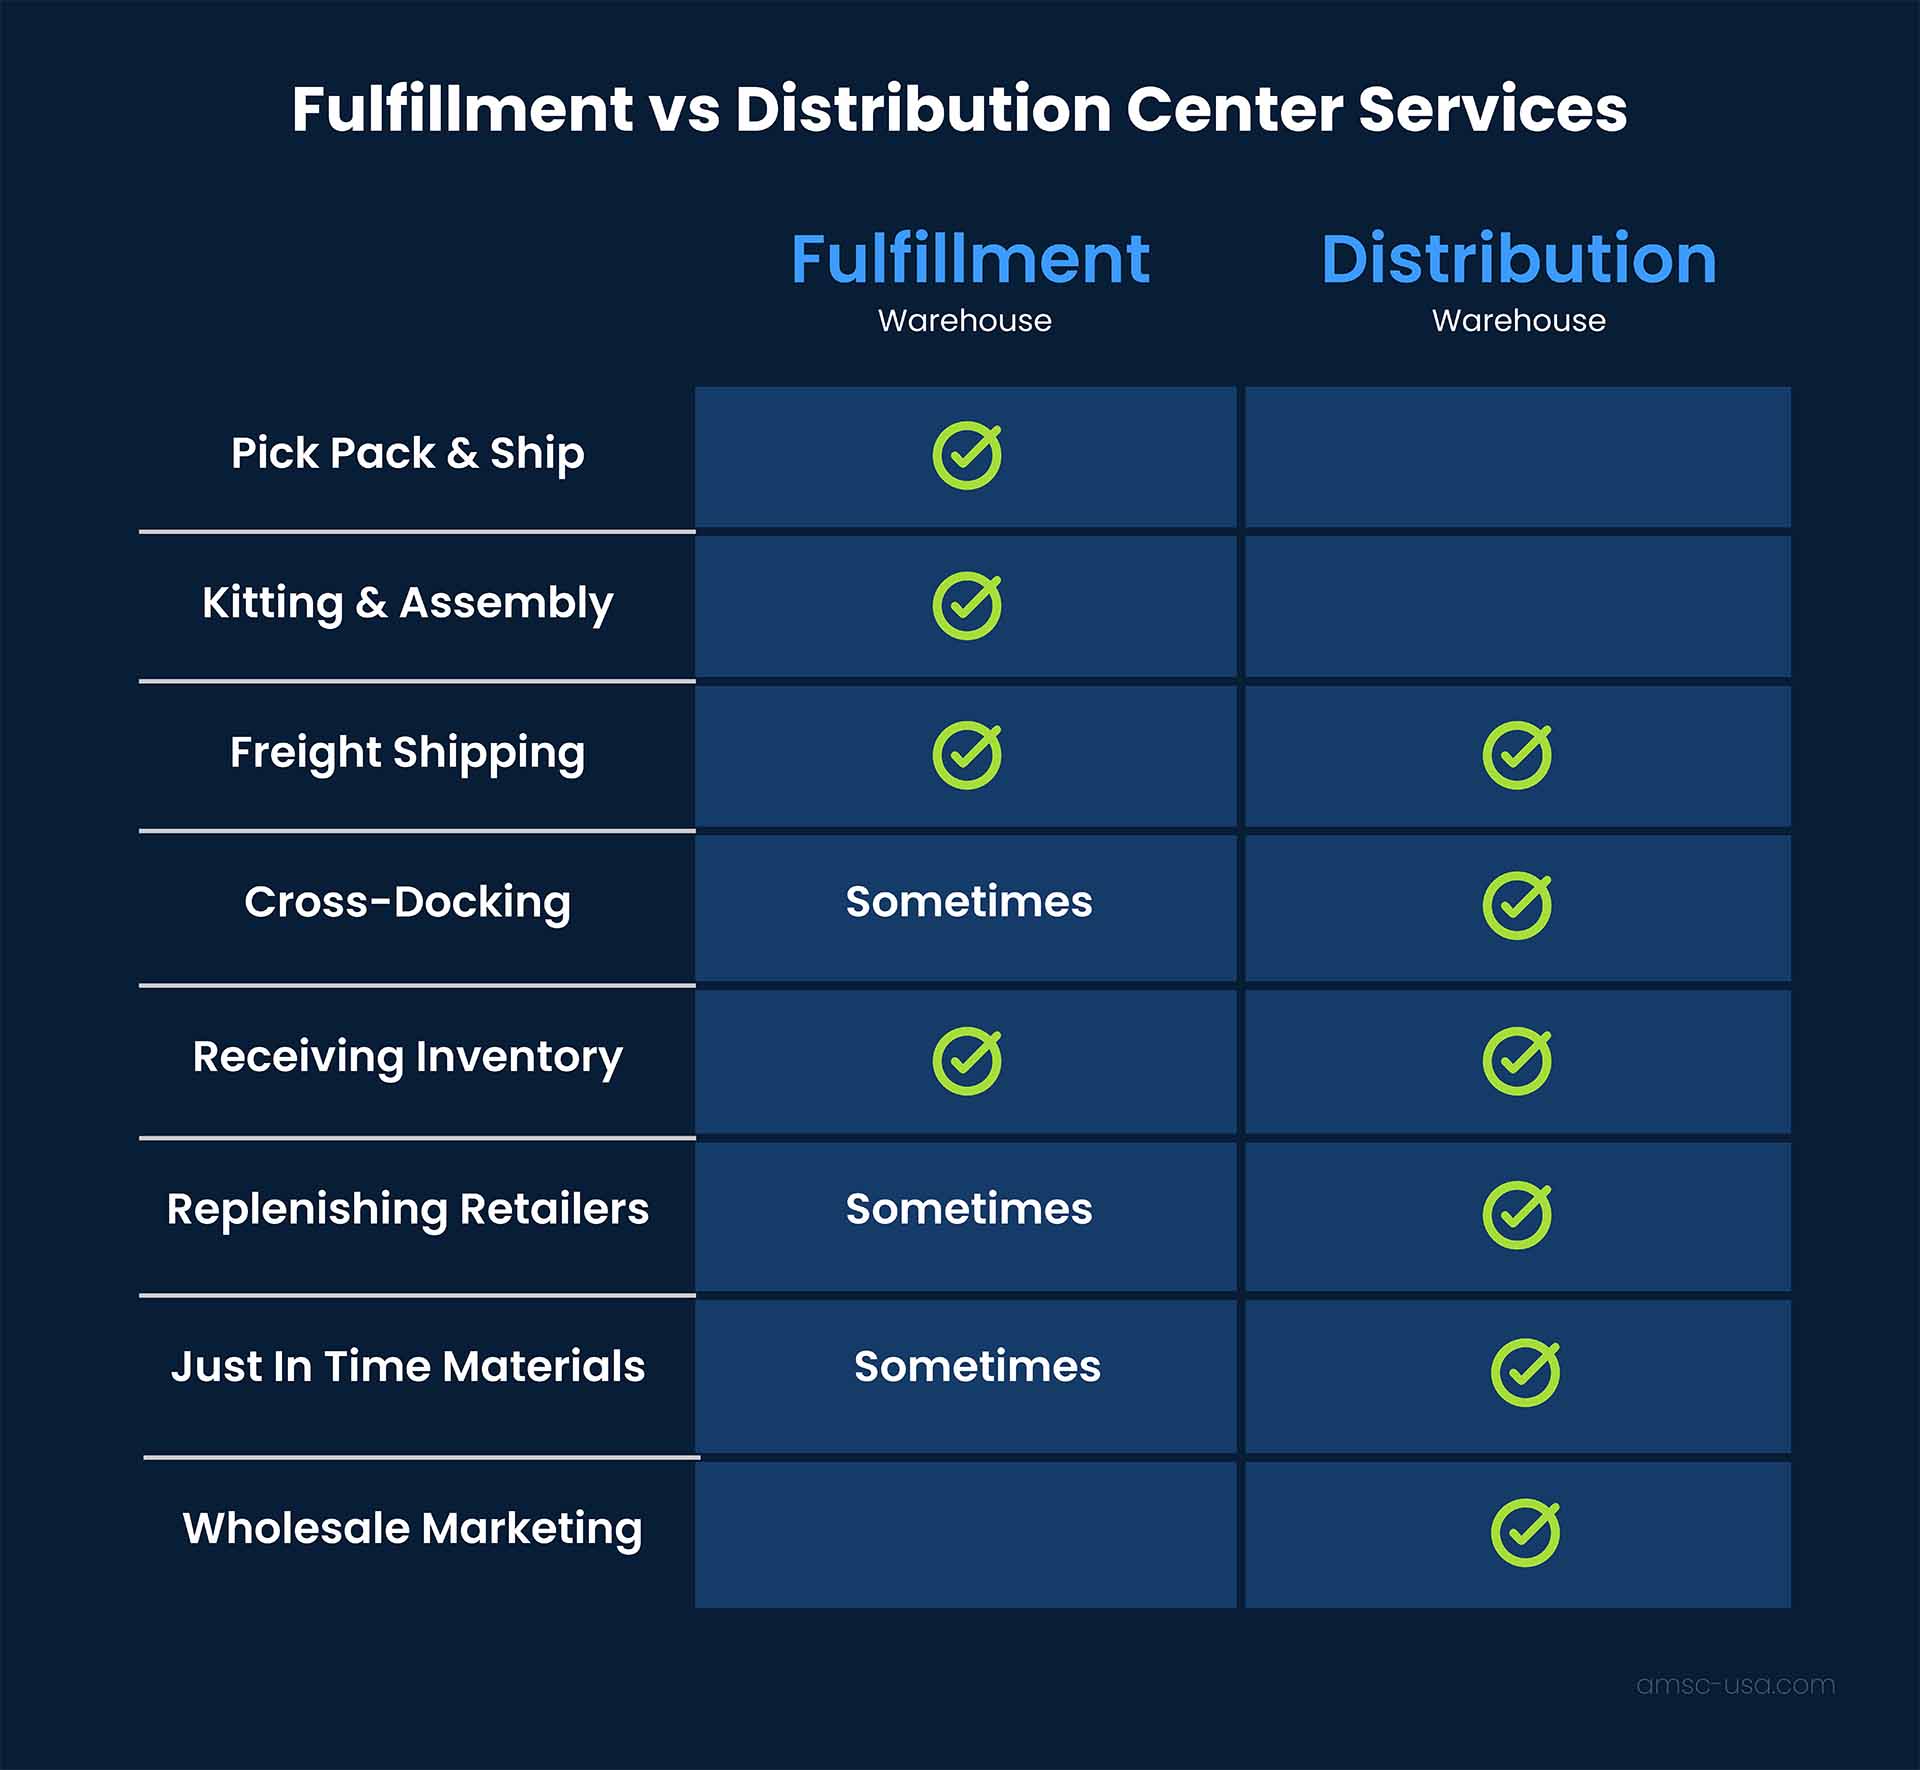 A table comparing fulfillment center and distribution center services